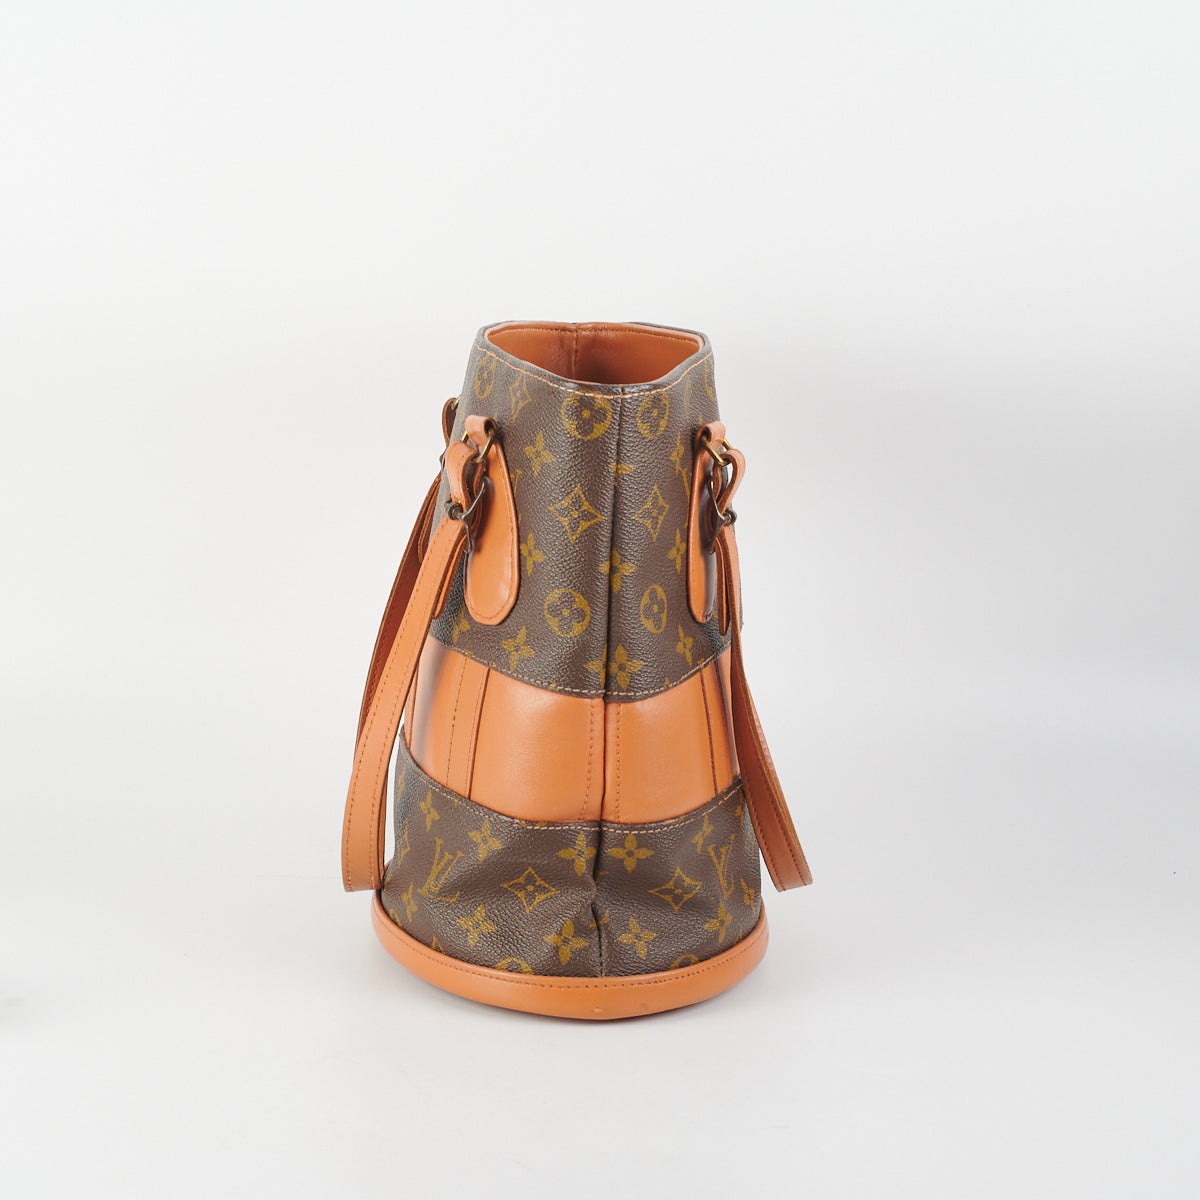 LOUIS VUITTON French Company Bucket Bag 15786